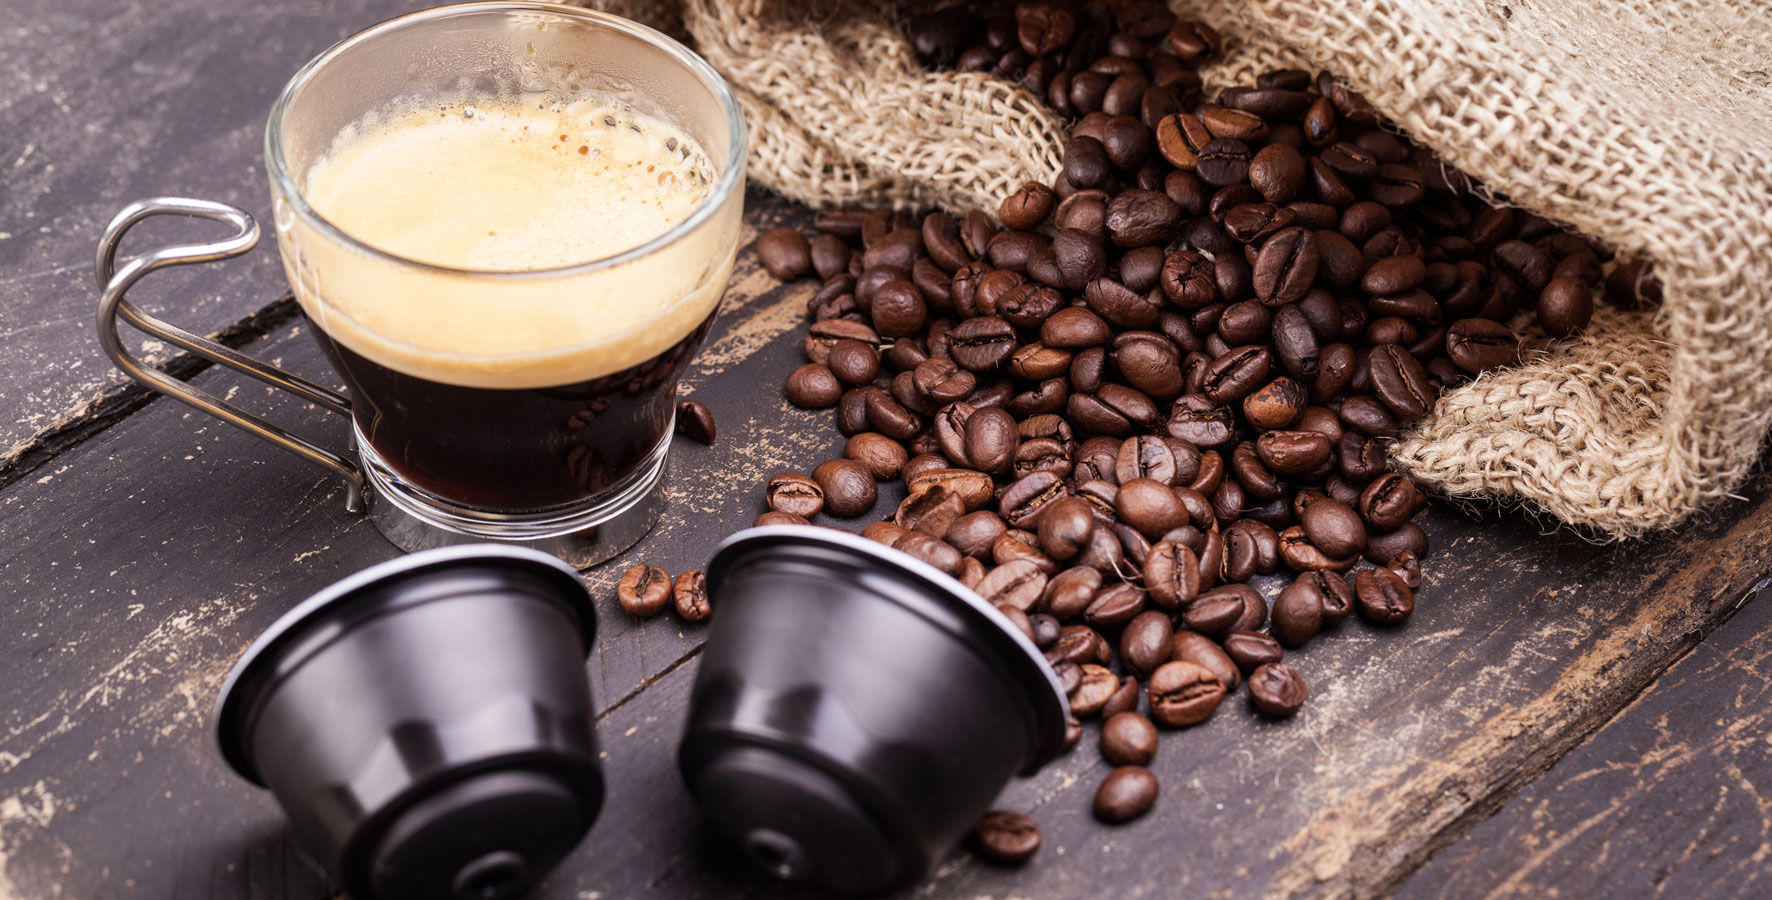 Coffee: from Africa to Switzerland, from bean picking to capsule thermoforming